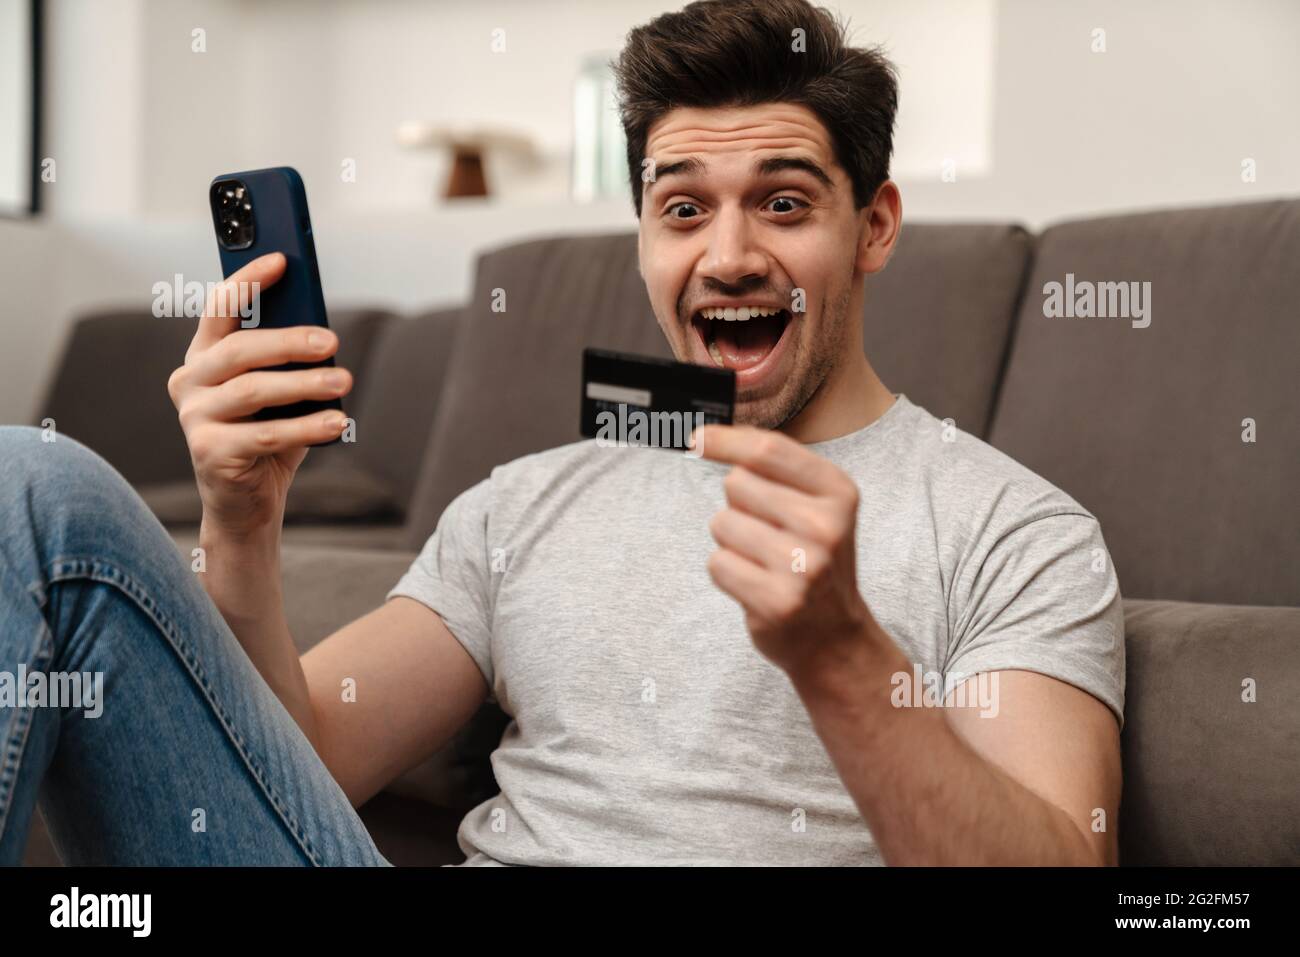 Excited brunette guy using mobile phone and credit card while sitting on floor at home Stock Photo